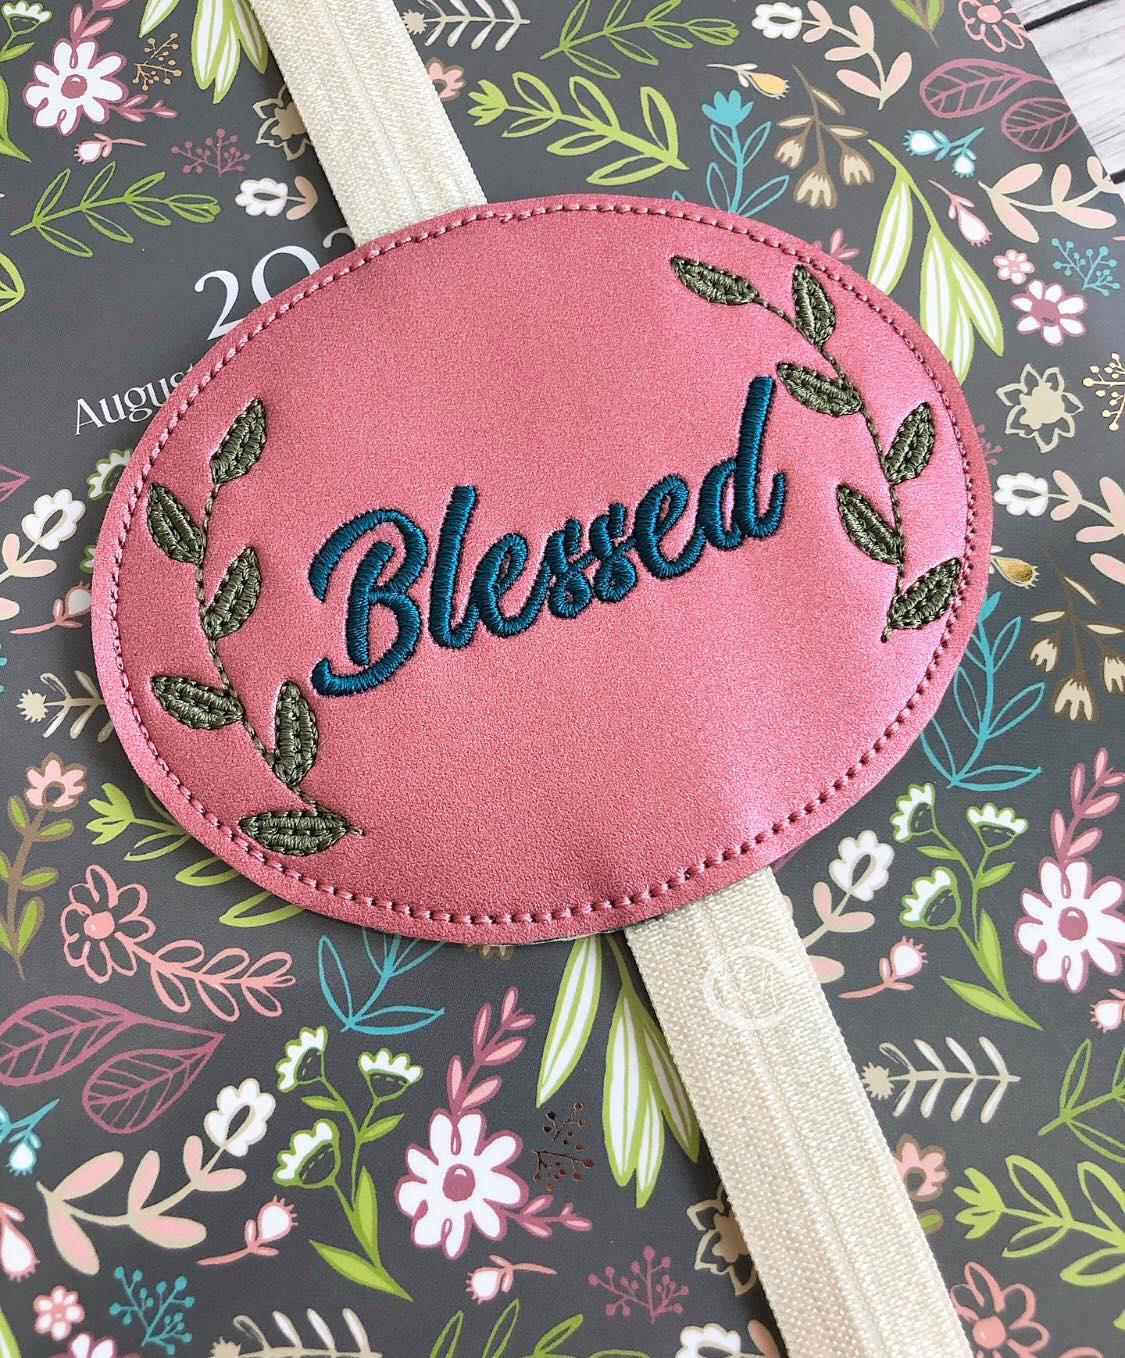 Blessed Book Band - Digital Embroidery Design